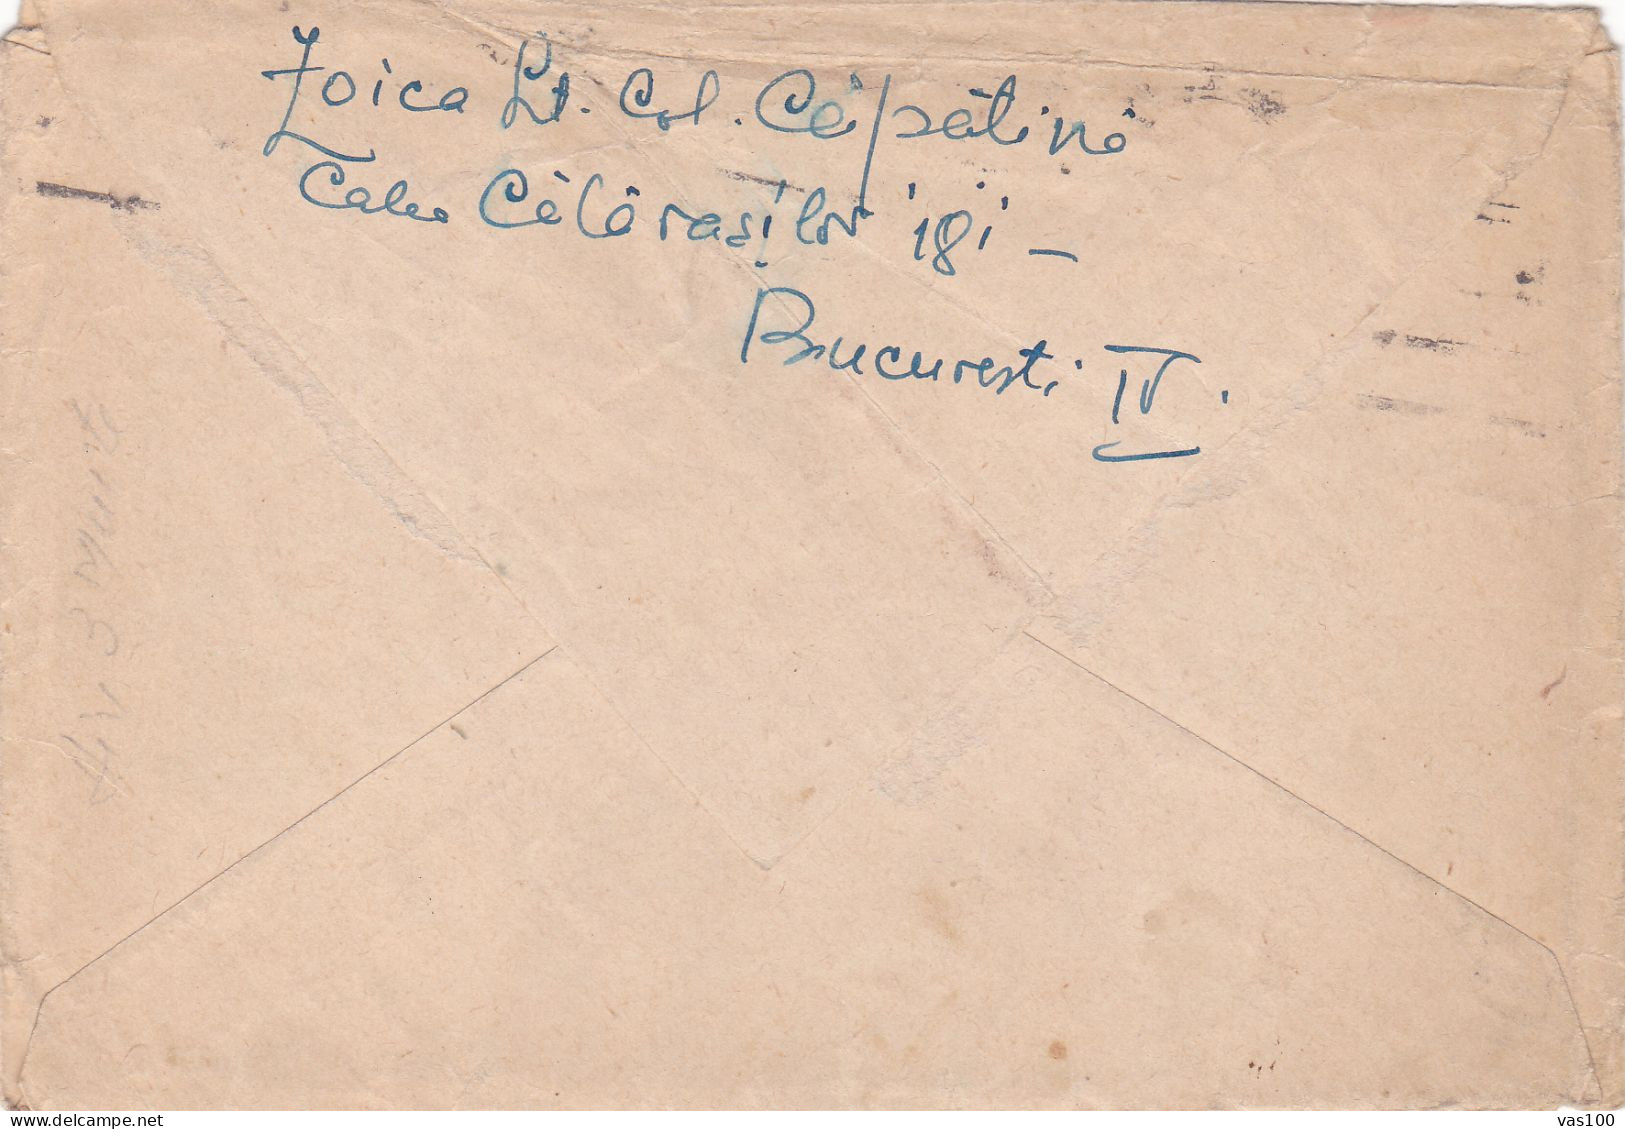 ROMANIA , 1945, WWII CENSORED,  ENVELOPE SENDED TO BATTLEFIELD - 2. Weltkrieg (Briefe)